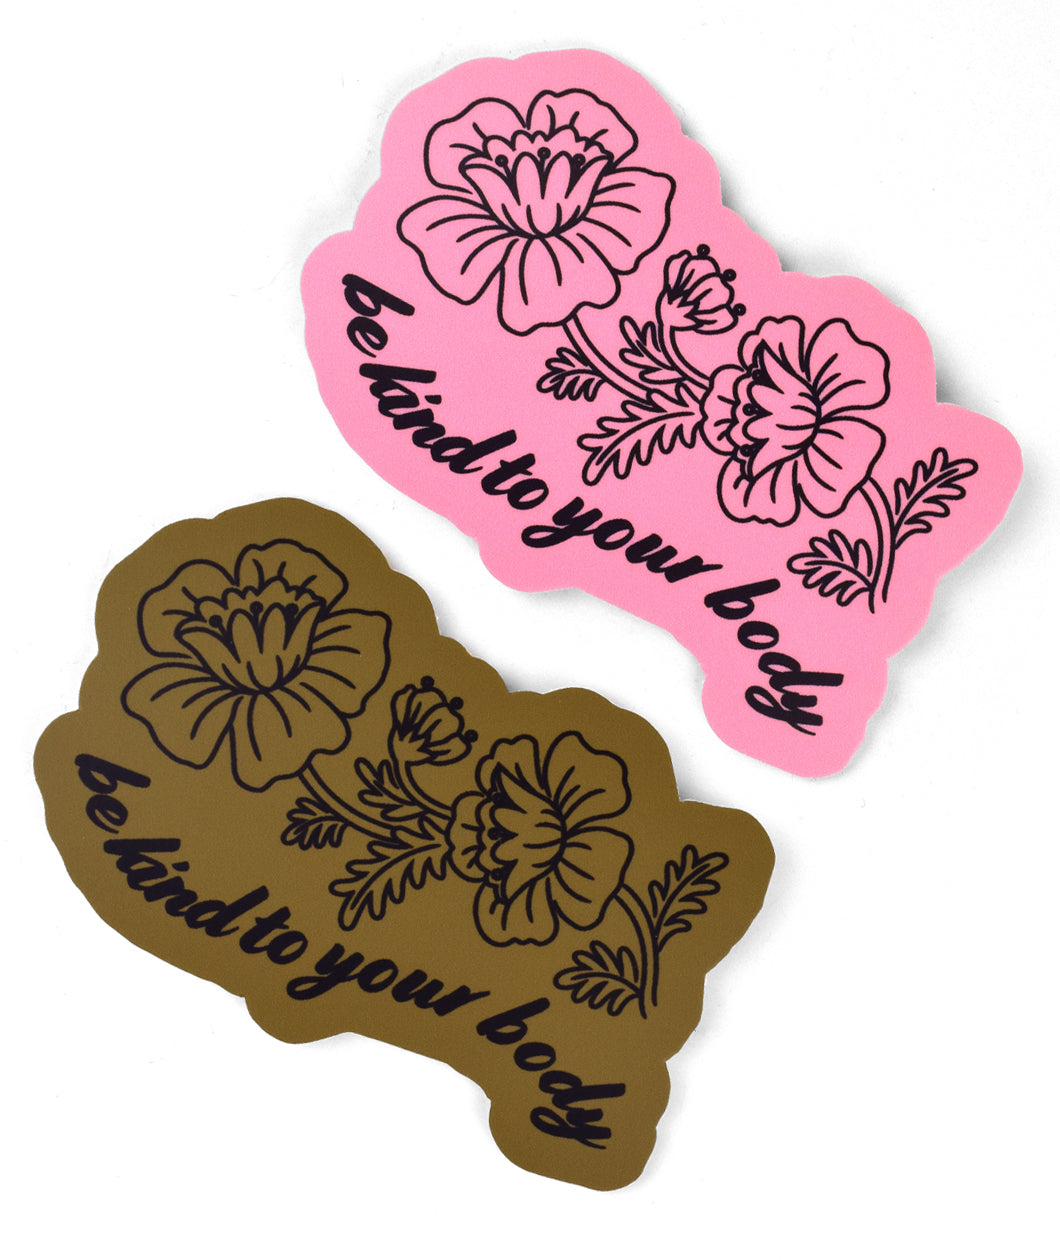 Two stickers both with a black outline of flowers with a stem attached and some leaves. Underneath, “be kind to your body” is in black cursive font below in a wavy style. One sticker has a pink base and the other a dark gold base - from Sierra Schultzzie